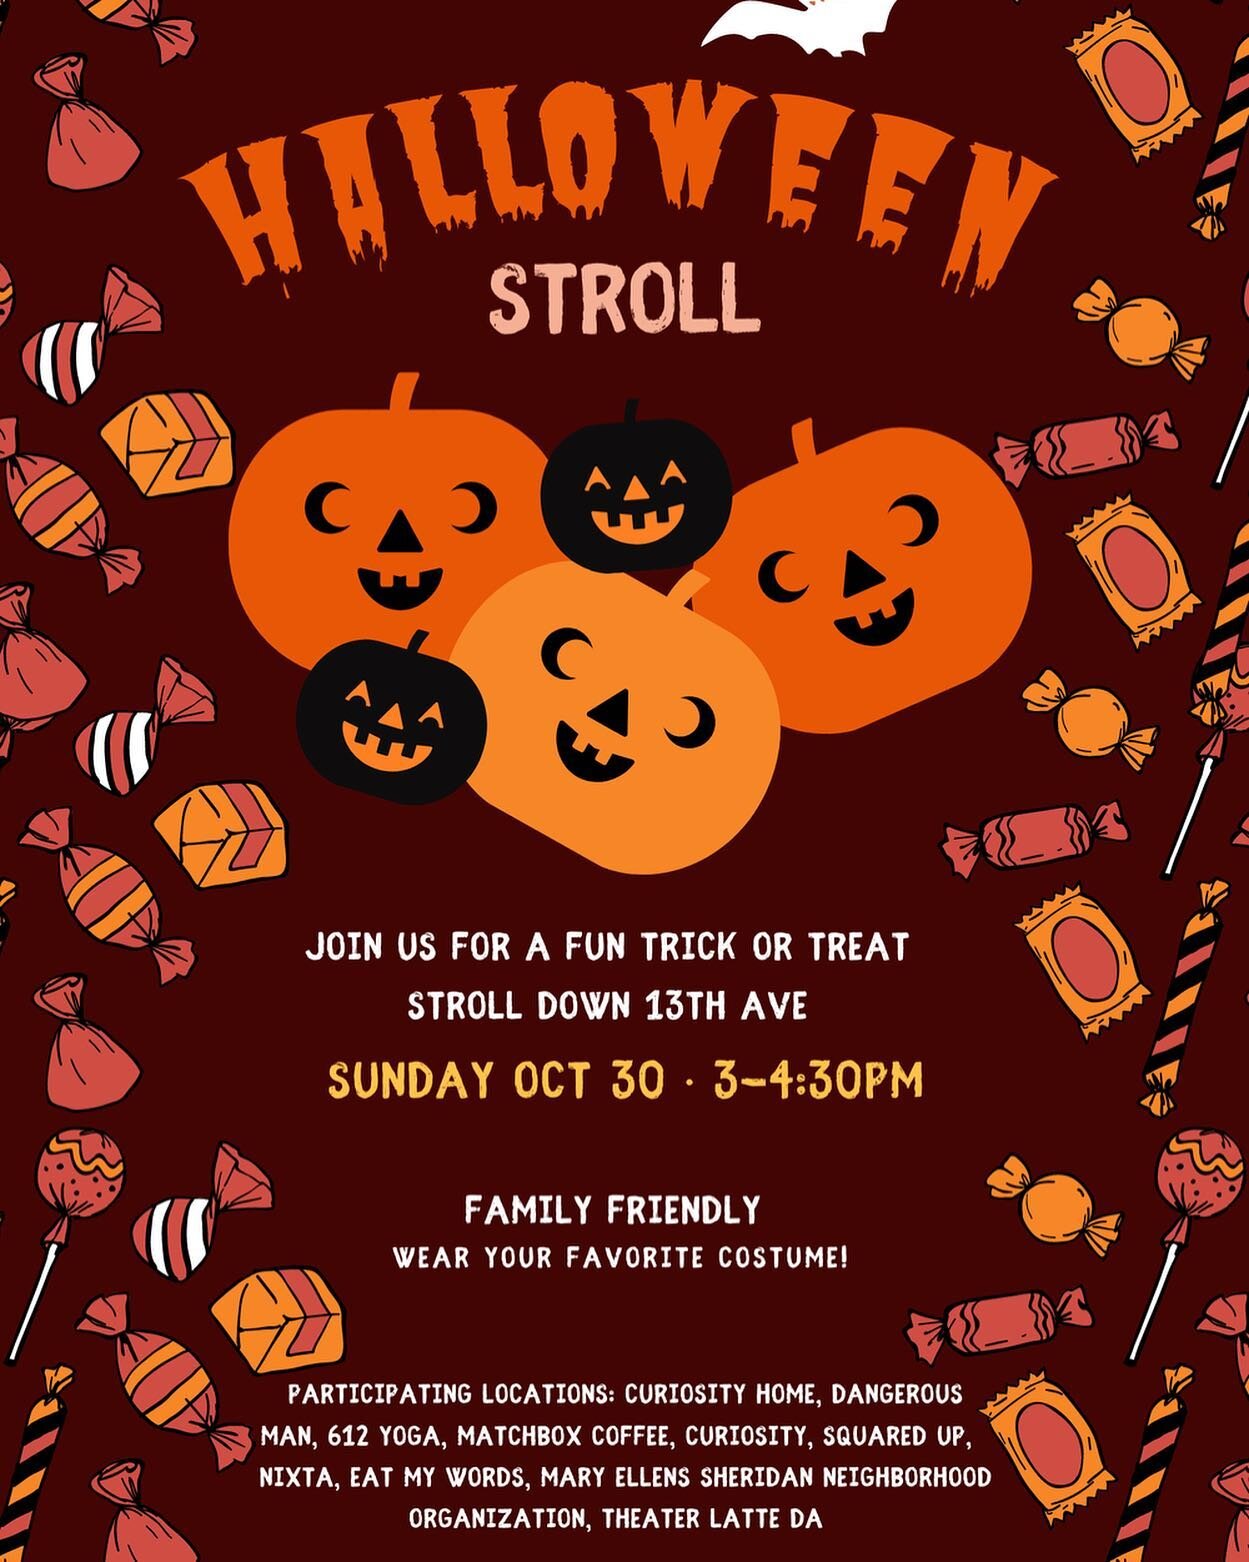 Join us and the businesses of 13th ave for our annual Halloween Stroll! 
@curiosityhomemn @curiosityneminneapolis @dangerousman @612.yoga @matchboxcoffeempls @squareduphair @nixtampls @eatmywordsbooks @theaterlatteda